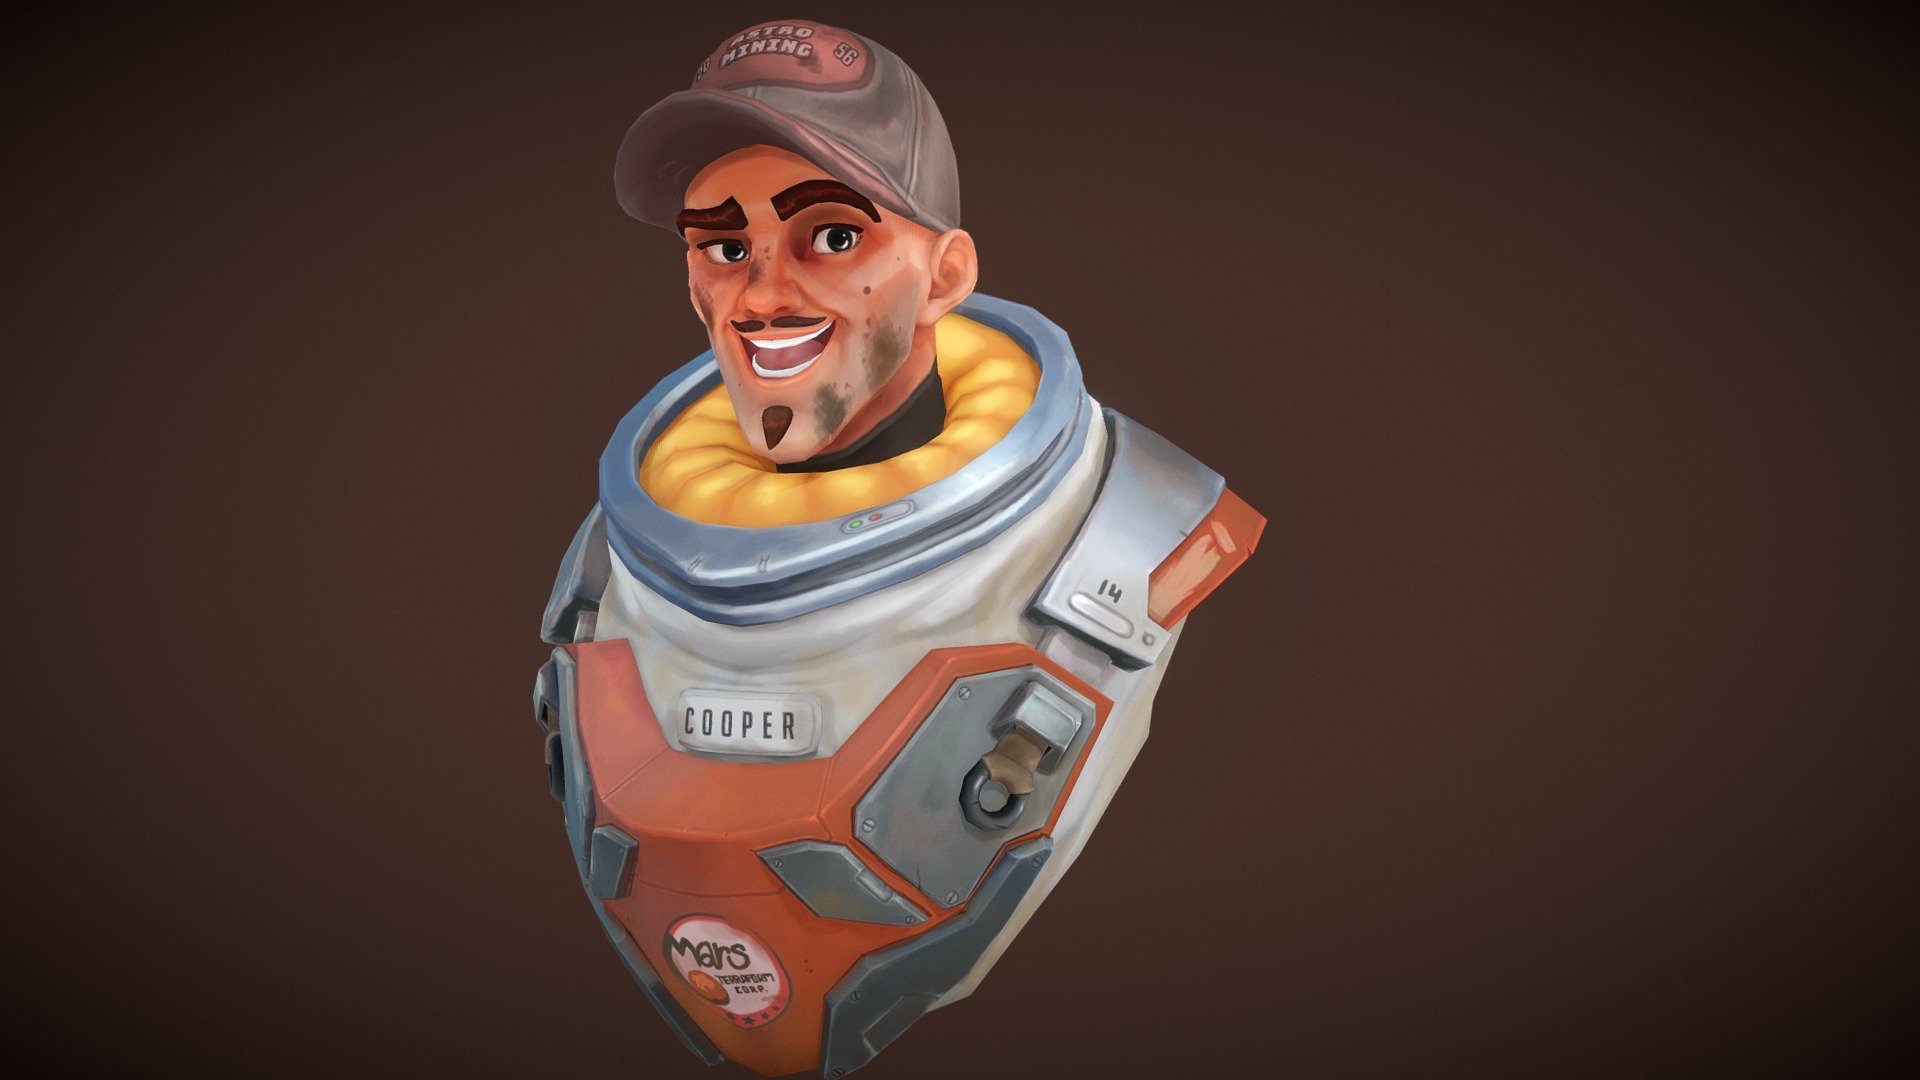 Coop is part of the Mars Terraforming Corporation, a company working to make the Red Planet habitable.

I've been meaning to try and create a hand-painted model for a long time, and this challenge gave me a much needed nudge. It was an amazing learning opportunity for me and I'm excited to improve on the next one! - Cooper - 3D model by lmazzei 3d model